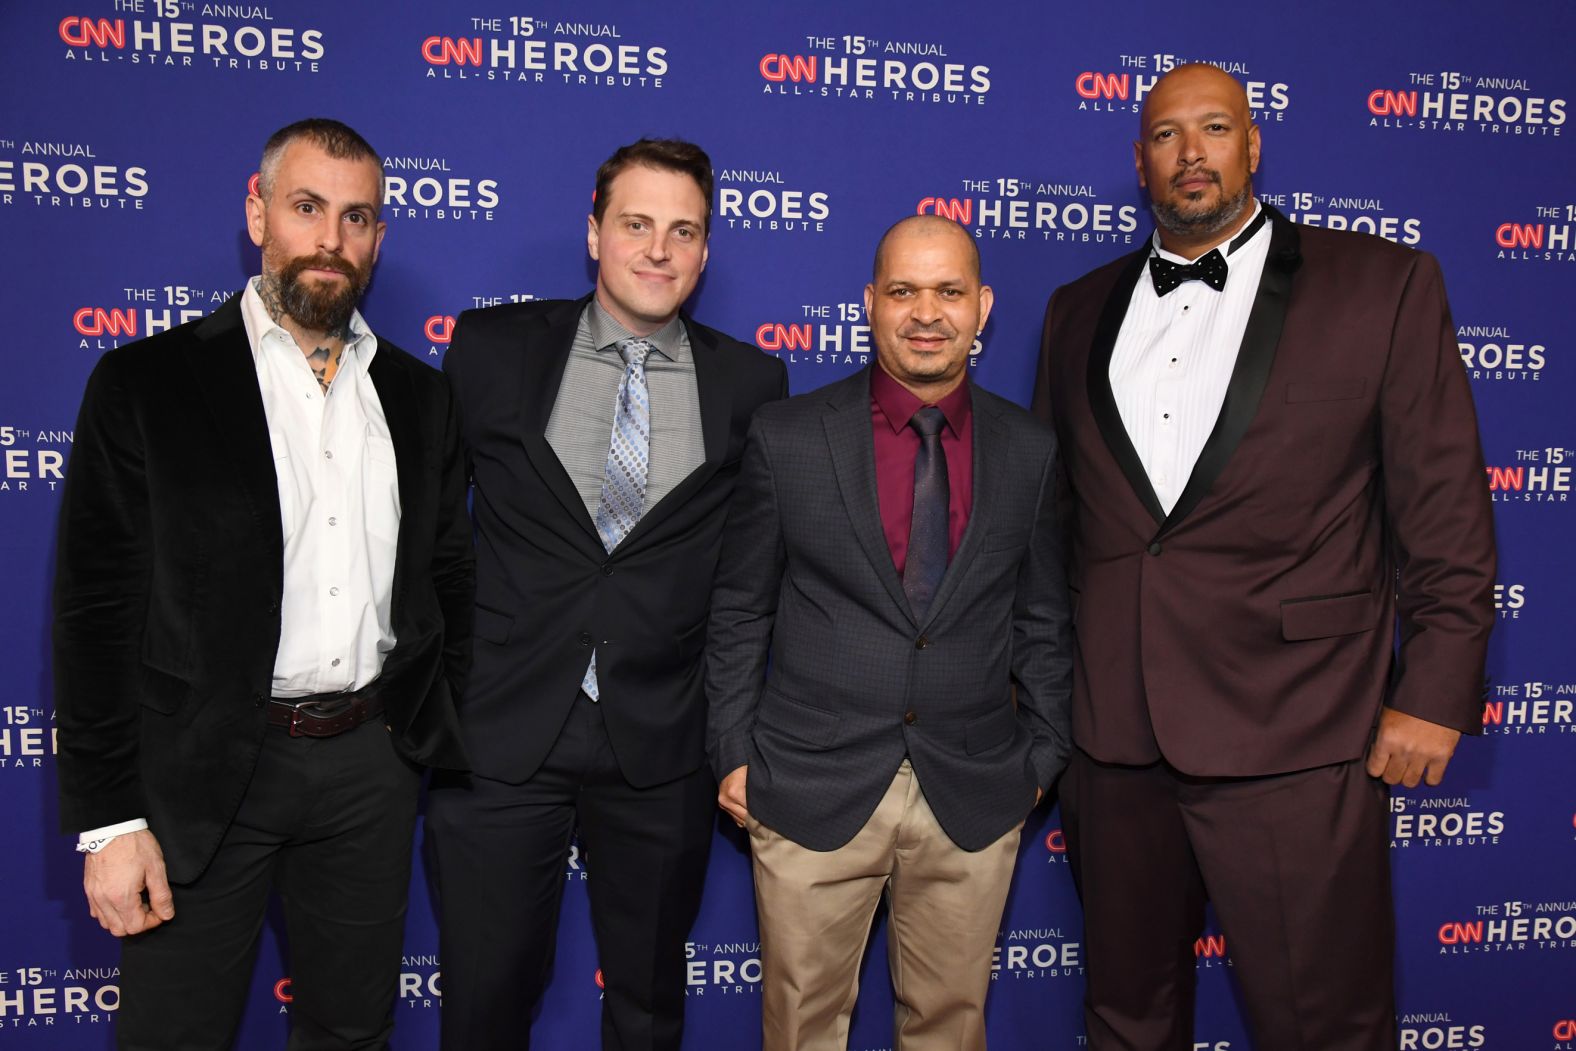 From left, Officer Michael Fanone, Officer Daniel Hodges, Sgt. Aquilino Gonell, and Pfc. Harry Dunn attend The 15th Annual 'CNN Heroes: All-Star Tribute' at the American Museum of Natural History on Sunday, December 12, in New York City.